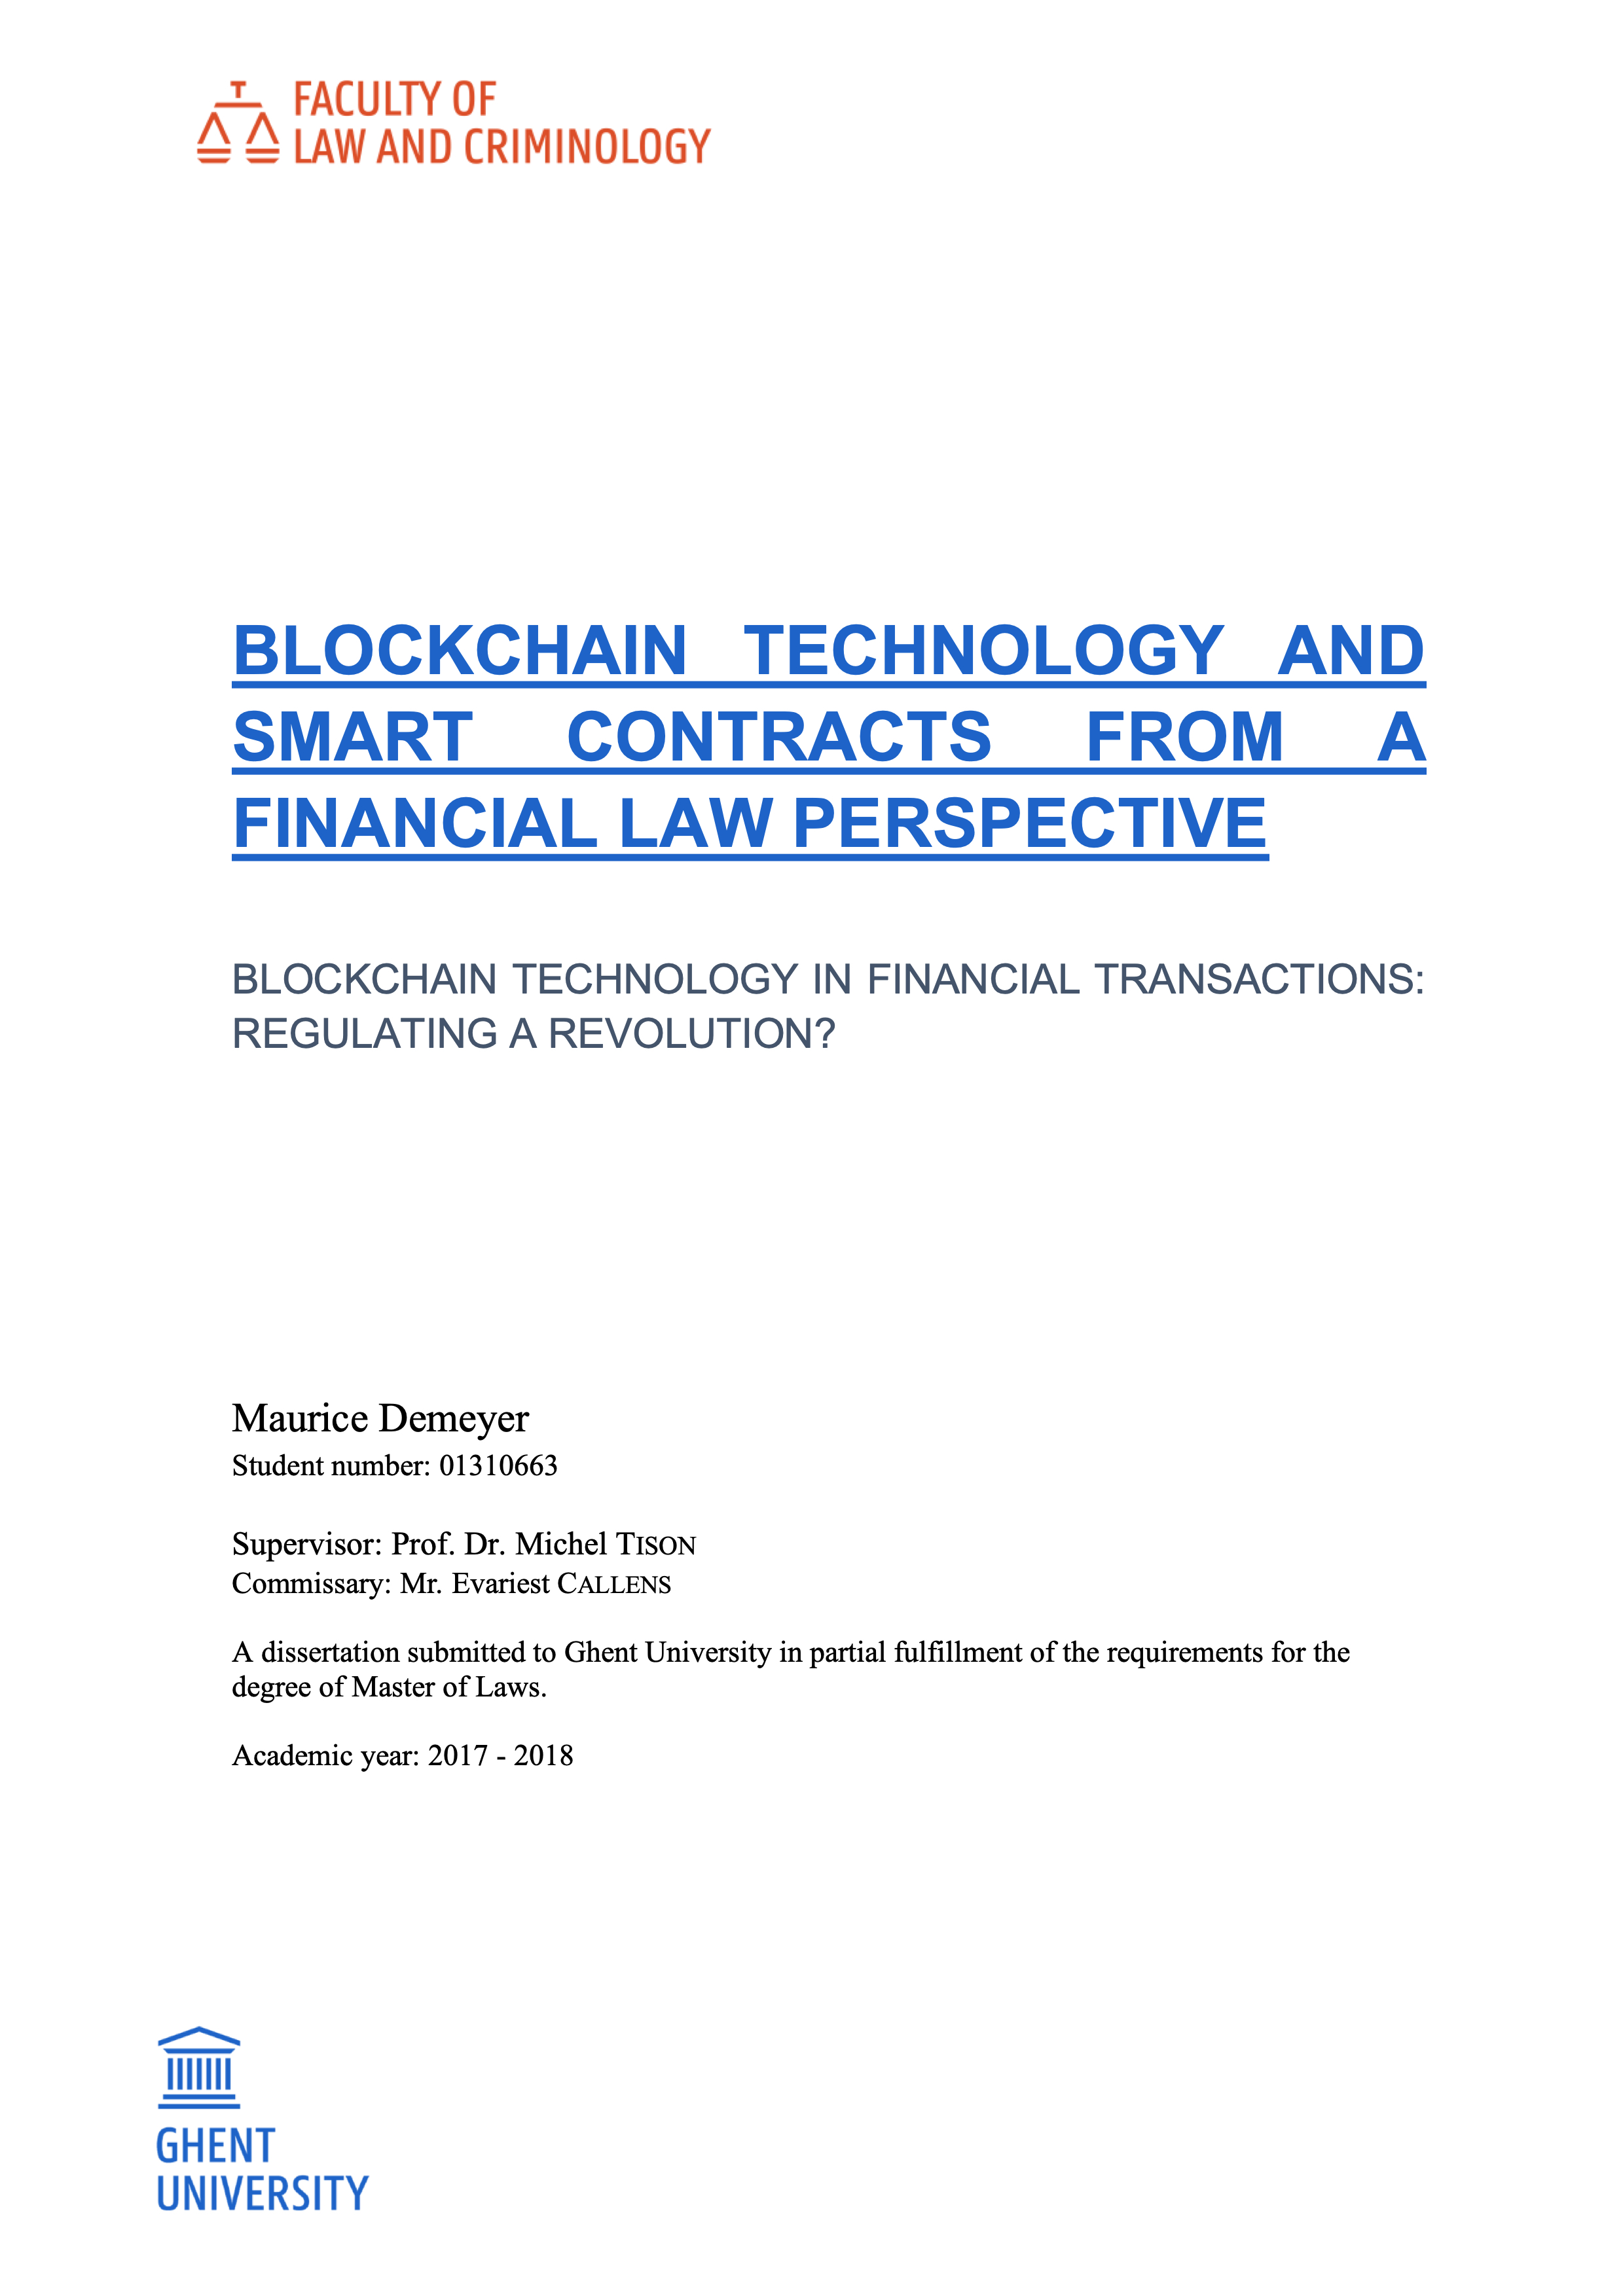 Blockchain technology and smart contracts from a financial law perspective